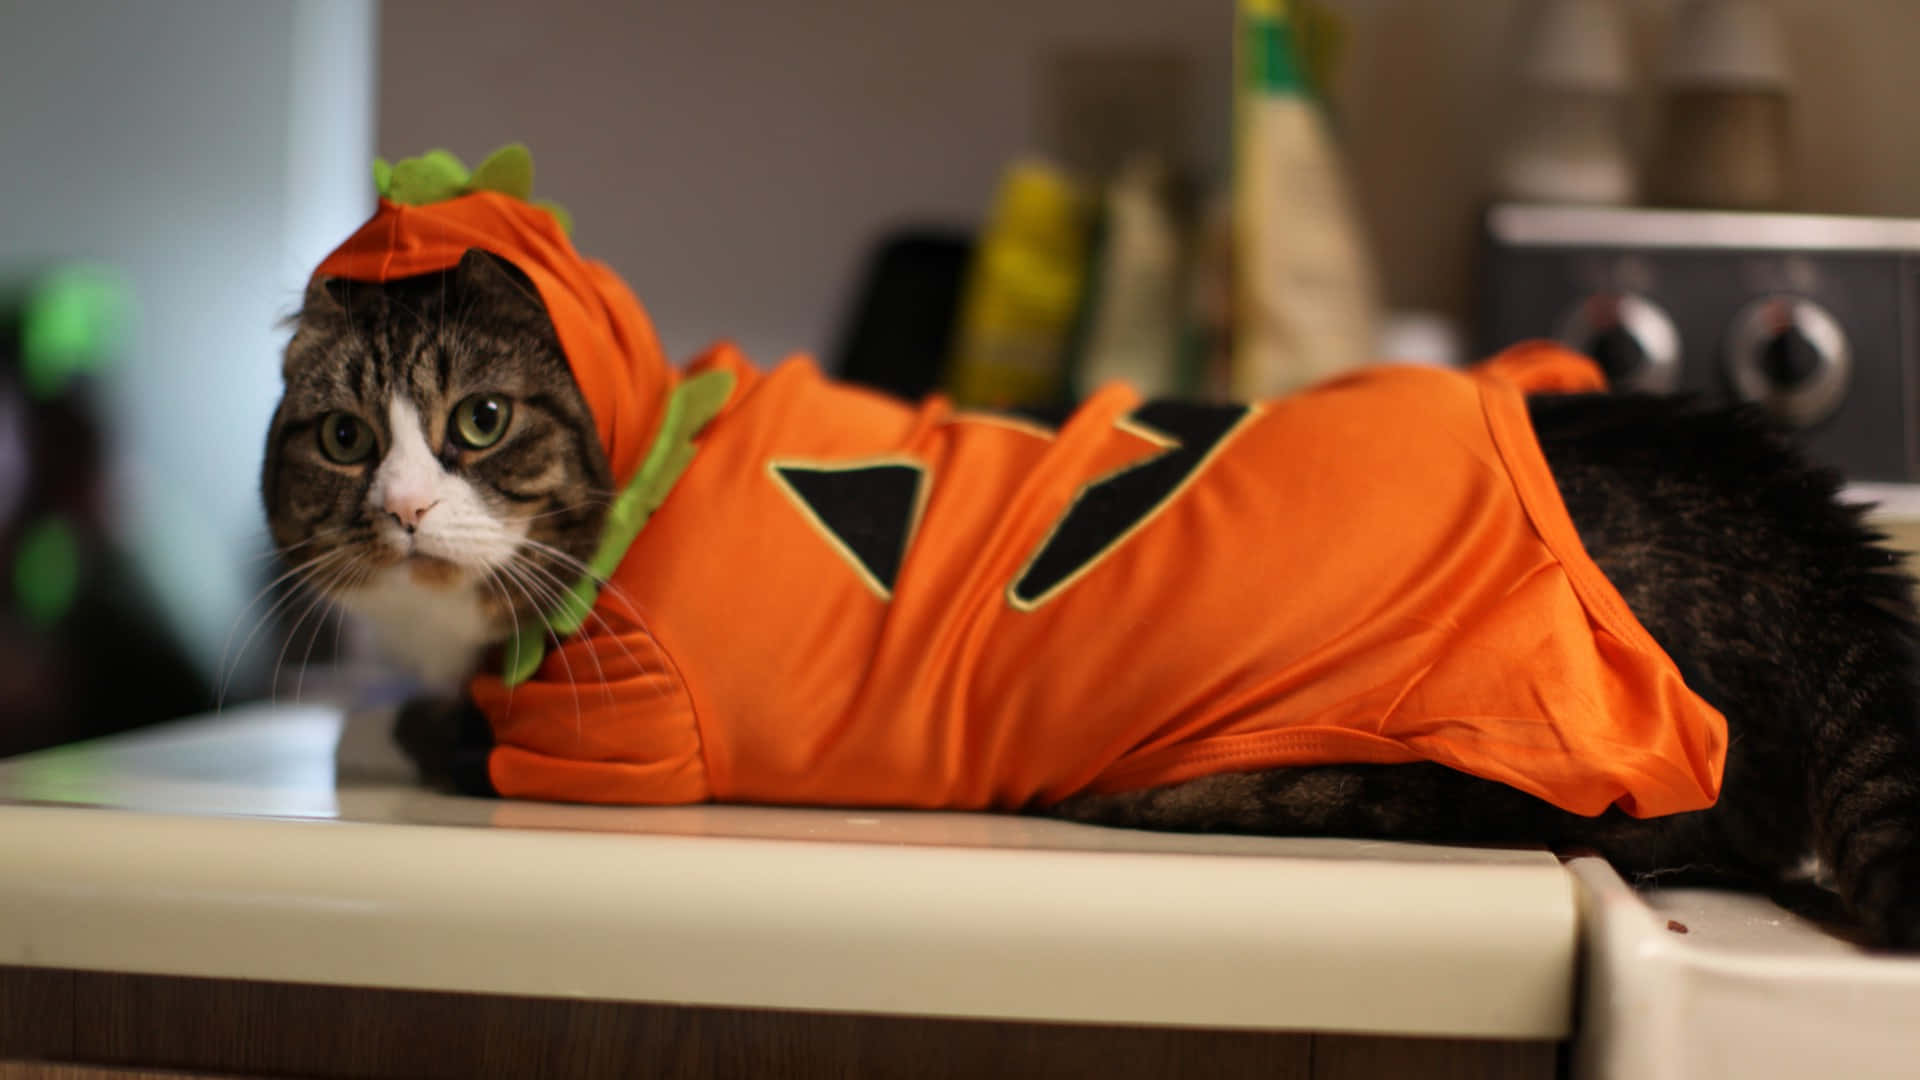 Explore festive possibilities this Halloween with these adorable pet costumes! Wallpaper